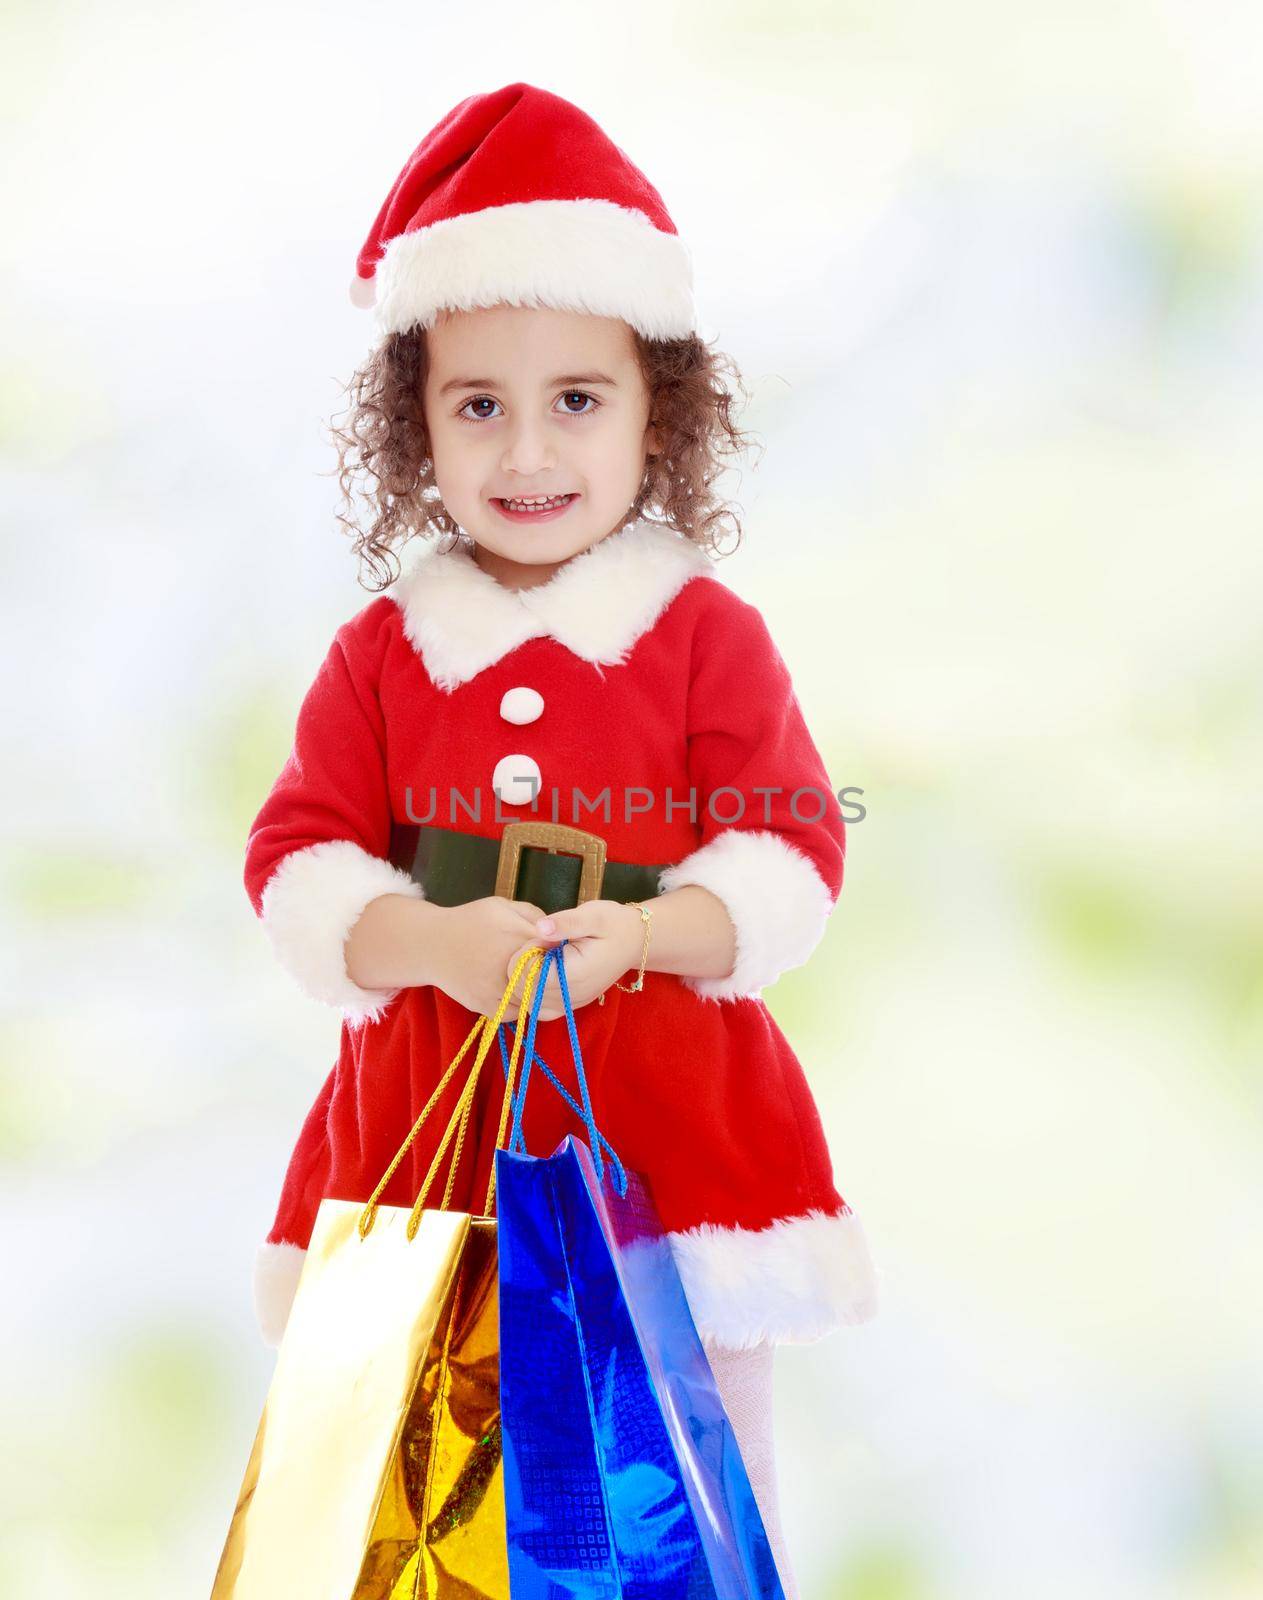 Gentle little curly-haired girl in a coat and hat of Santa Claus holding colorful shopping bags. Close-up.white-green blurred abstract background with snowflakes.